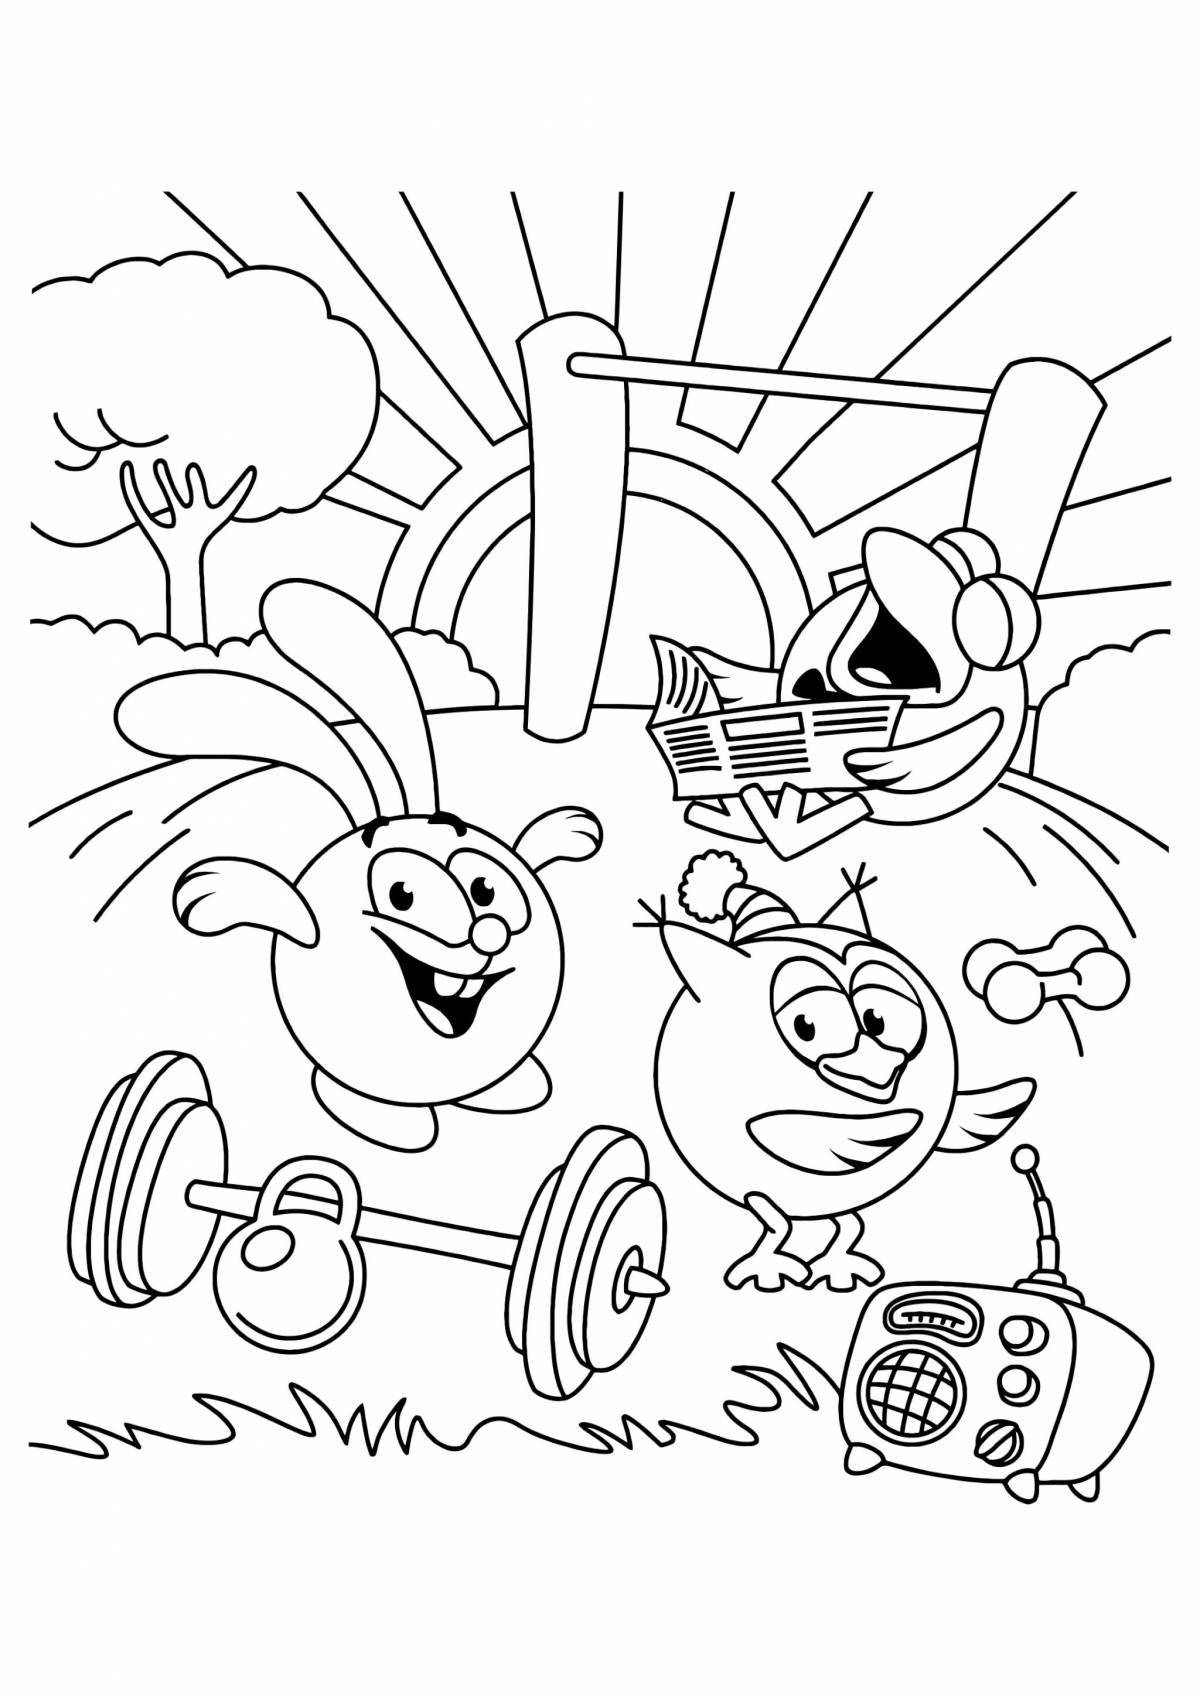 A fun coloring book about a healthy lifestyle for schoolchildren